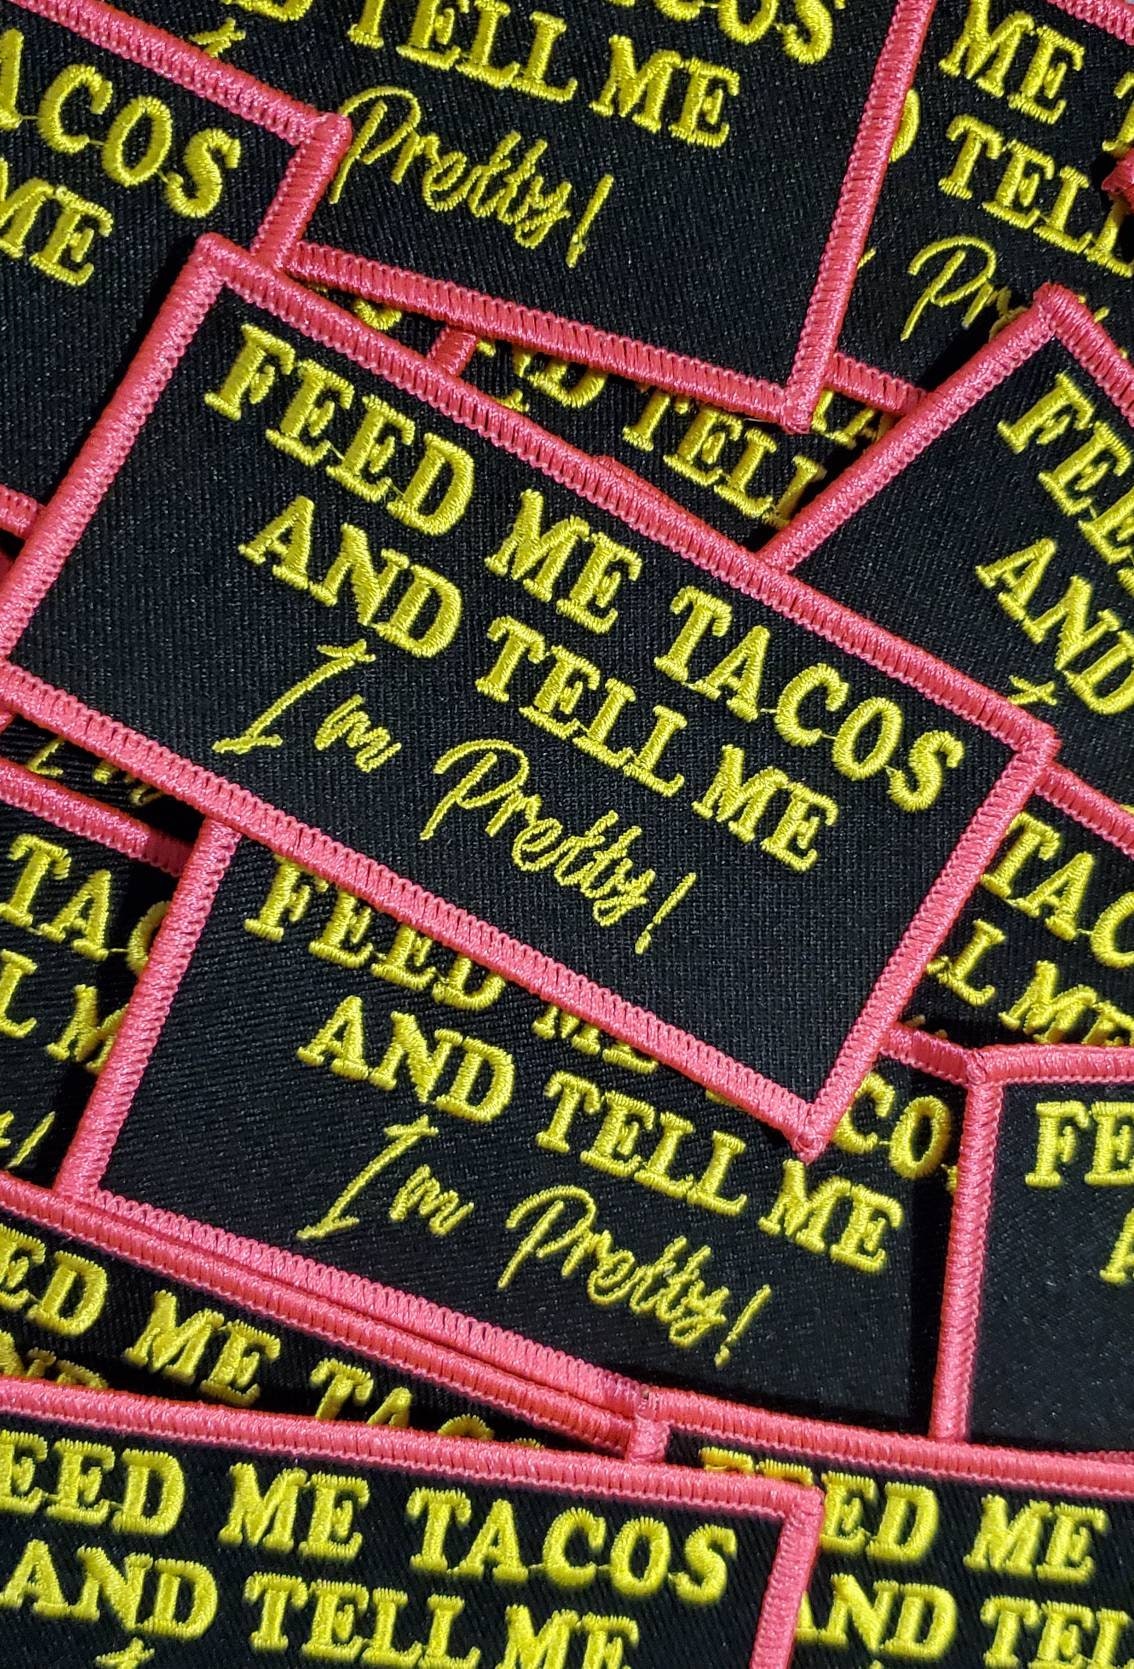 NEW Exclusive "Feed Me Tacos" Snazzy Statement Patch, Iron-on Embroidered Patch; Feminist Patch, Size 3.75"x2", Hot pink & Black Patch, Diy